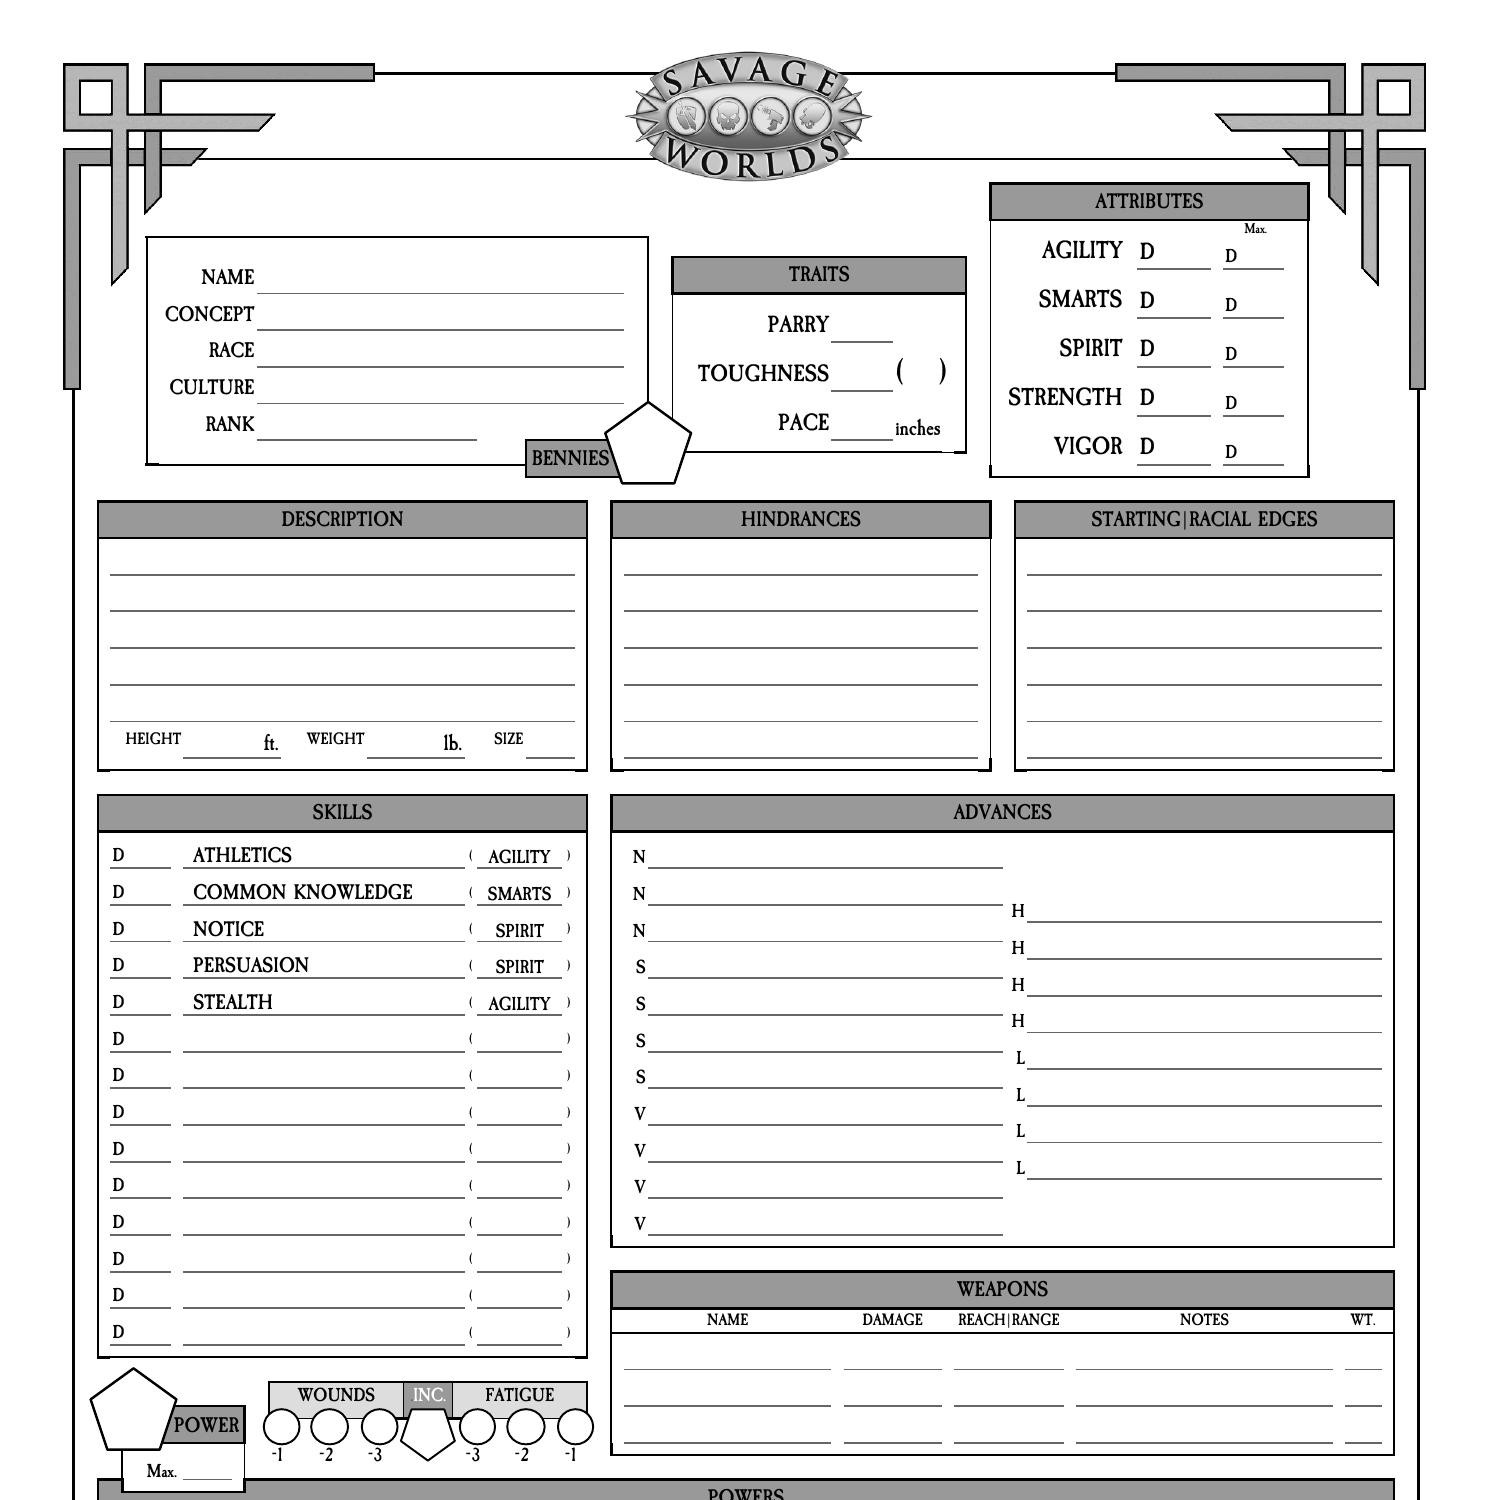 Character Sheet.pdf DocDroid